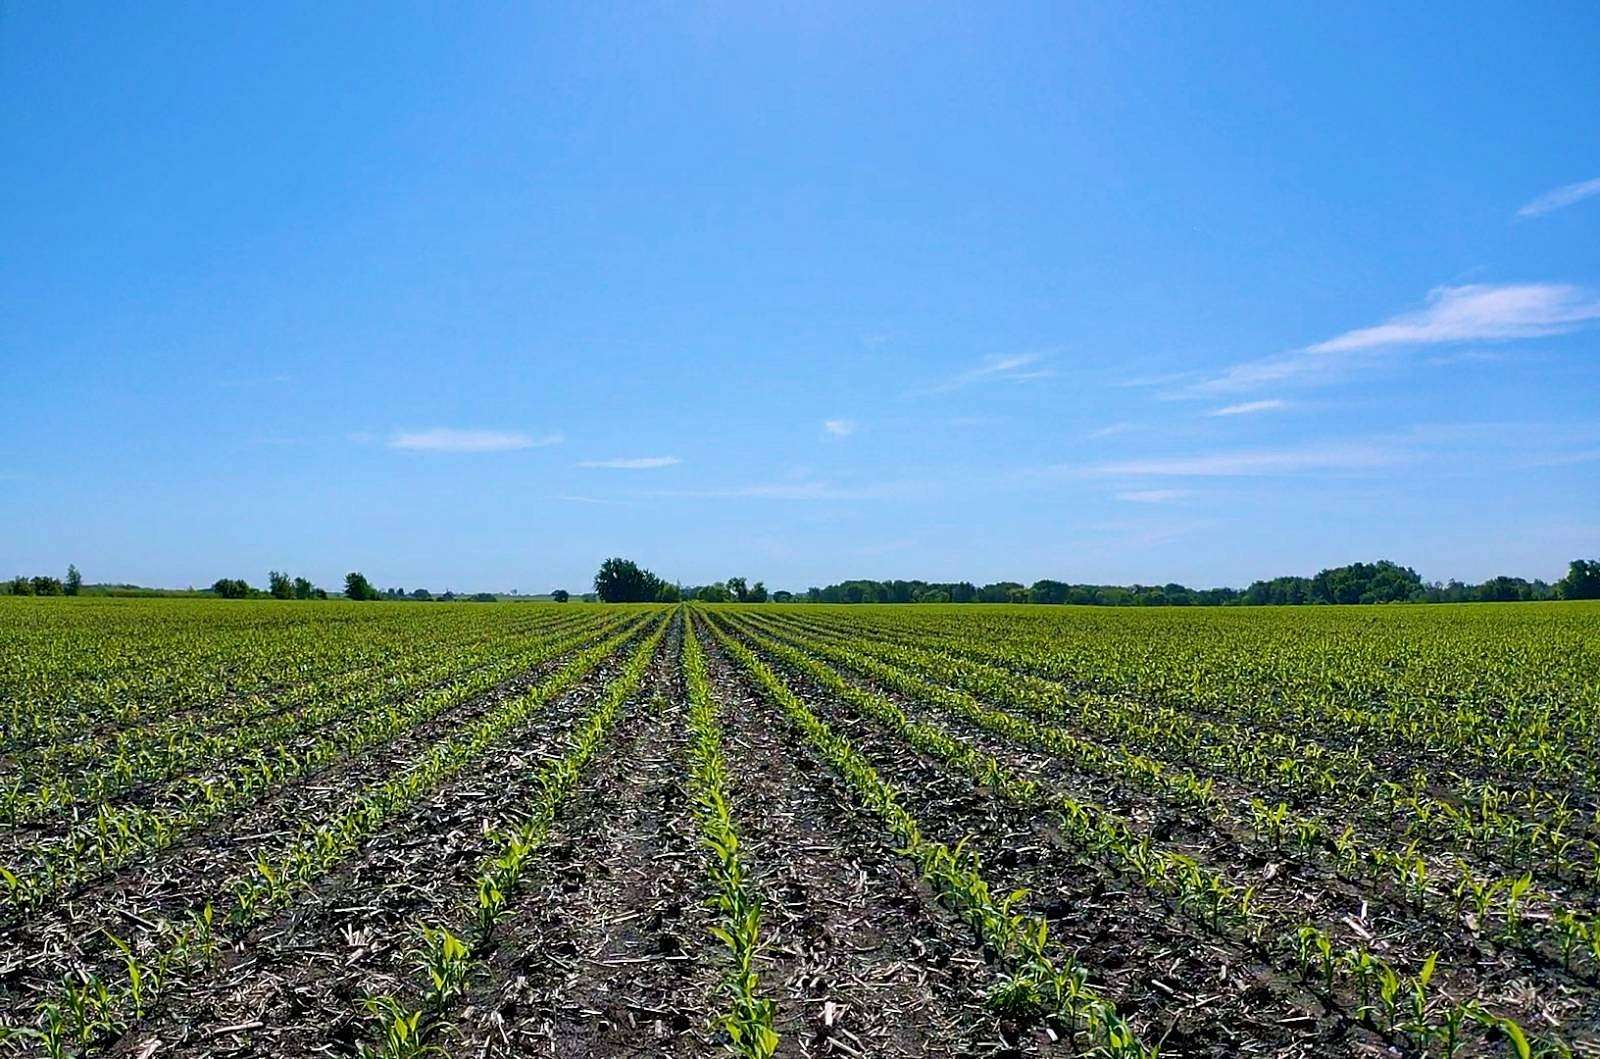 76.38 Acres of Agricultural Land for Sale in Sumner, Iowa